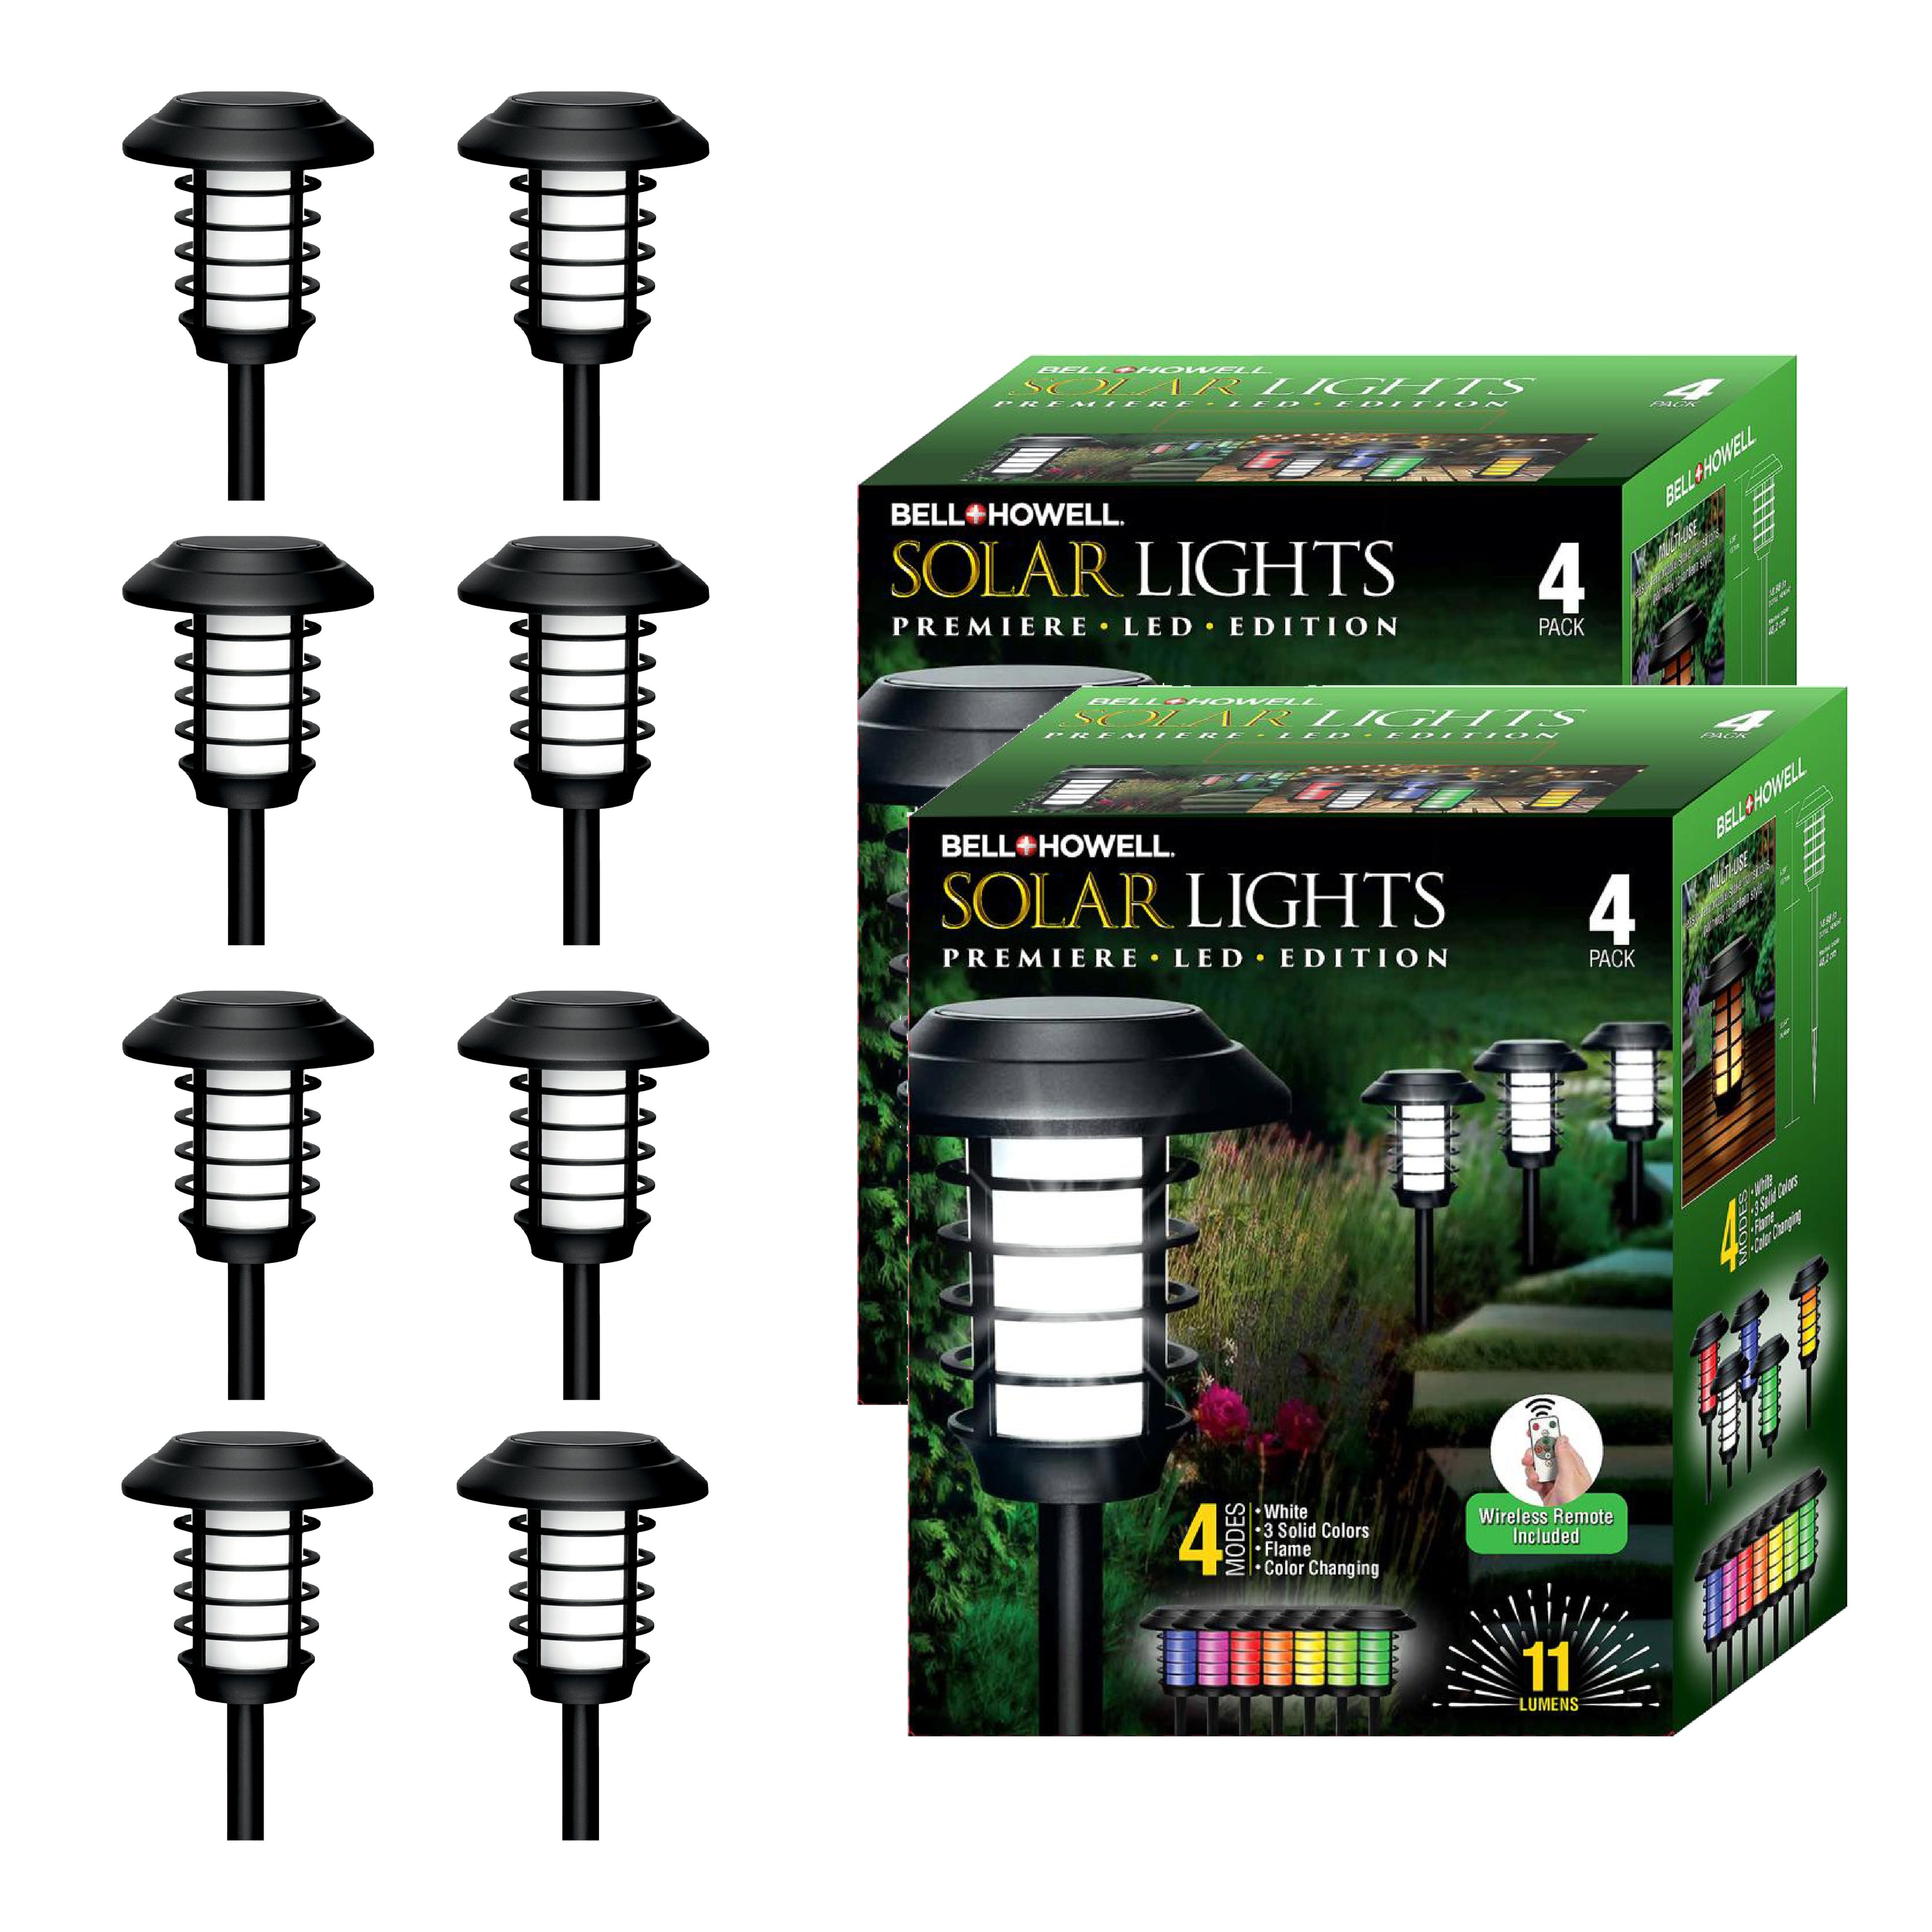 Bell + Howell Color Changing Solar Pathway Lights- 8 PK